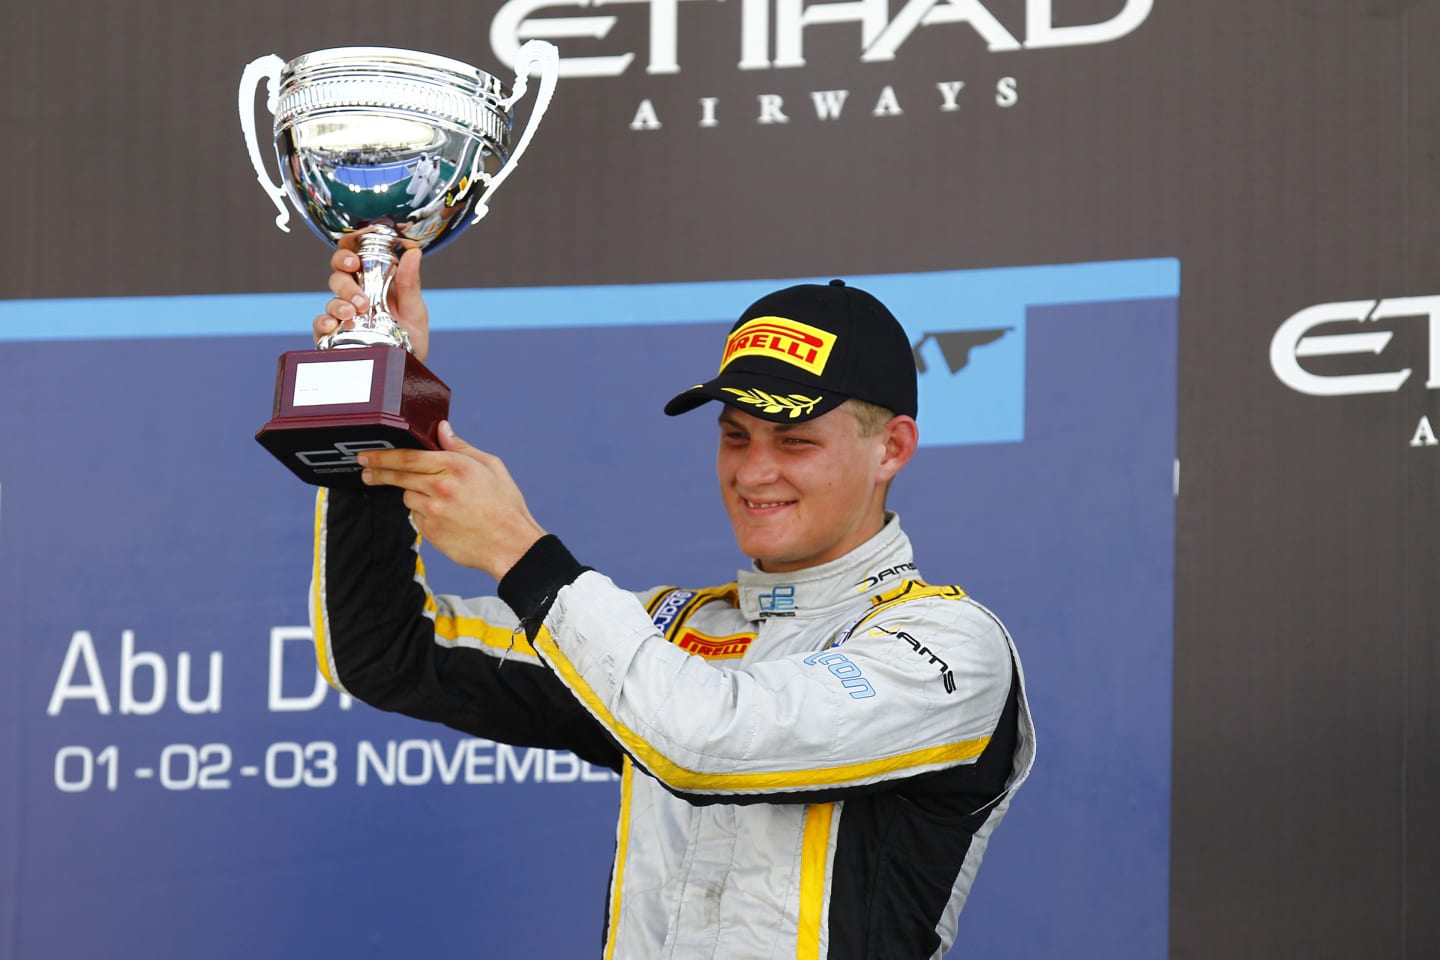 The man making way for Kimi Raikkonen at Sauber next year, Marcus Ericsson spent four seasons in GP2 from 2010-2013, netting three wins in his time for Super Nova Racing, iSport International and DAMS. His F1 debut with Caterham followed in 2014, before spending four seasons with Sauber. He’ll be the Swiss team’s third driver in 2019.